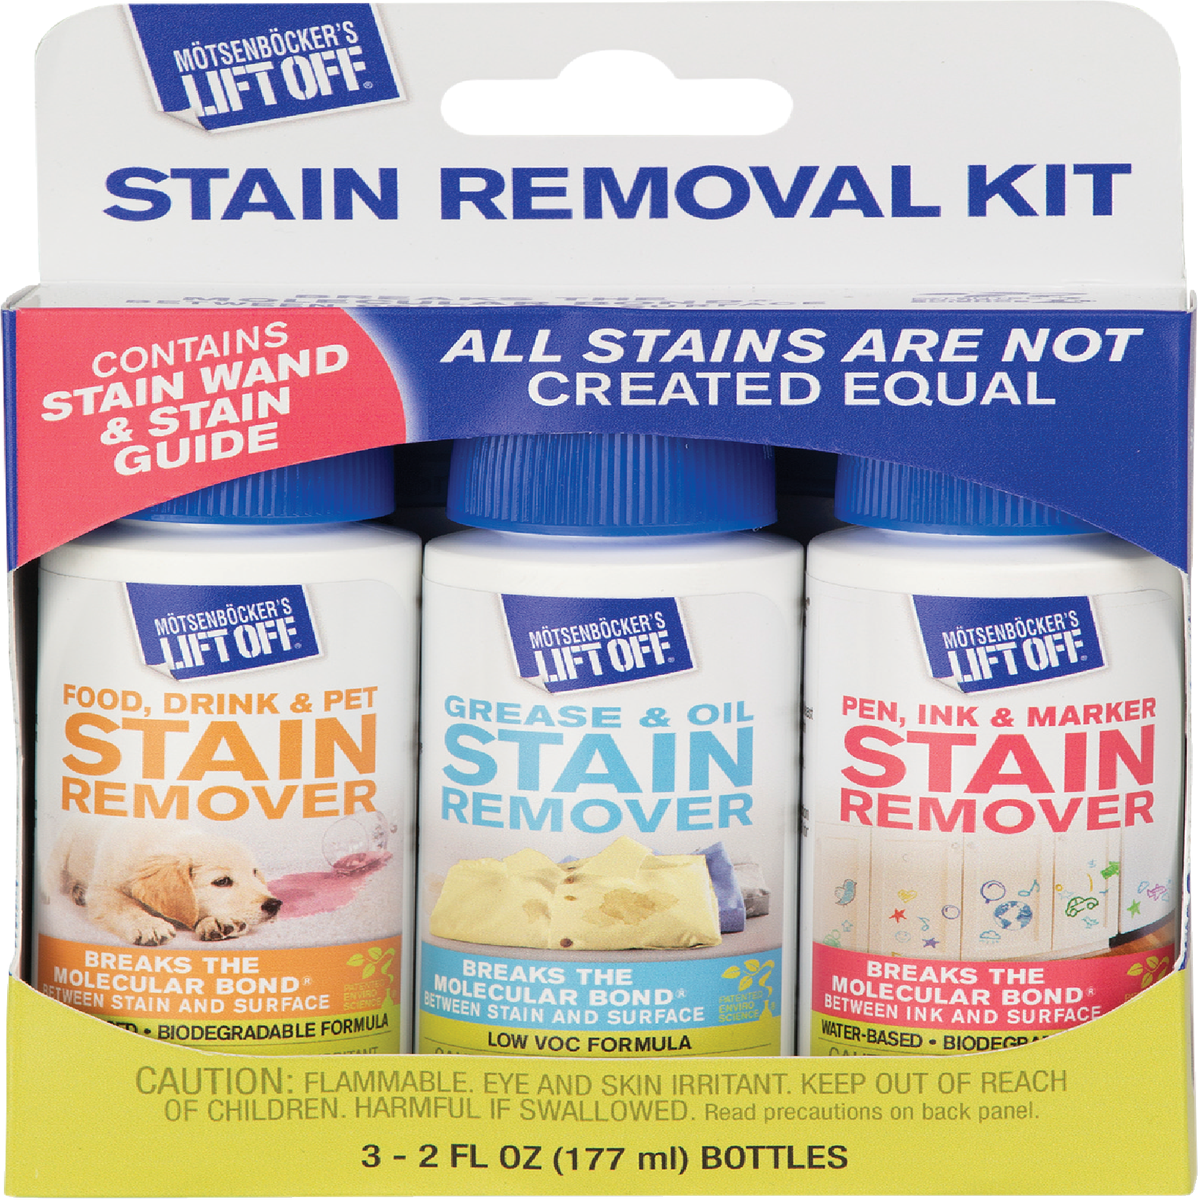 Stain Remover Kit